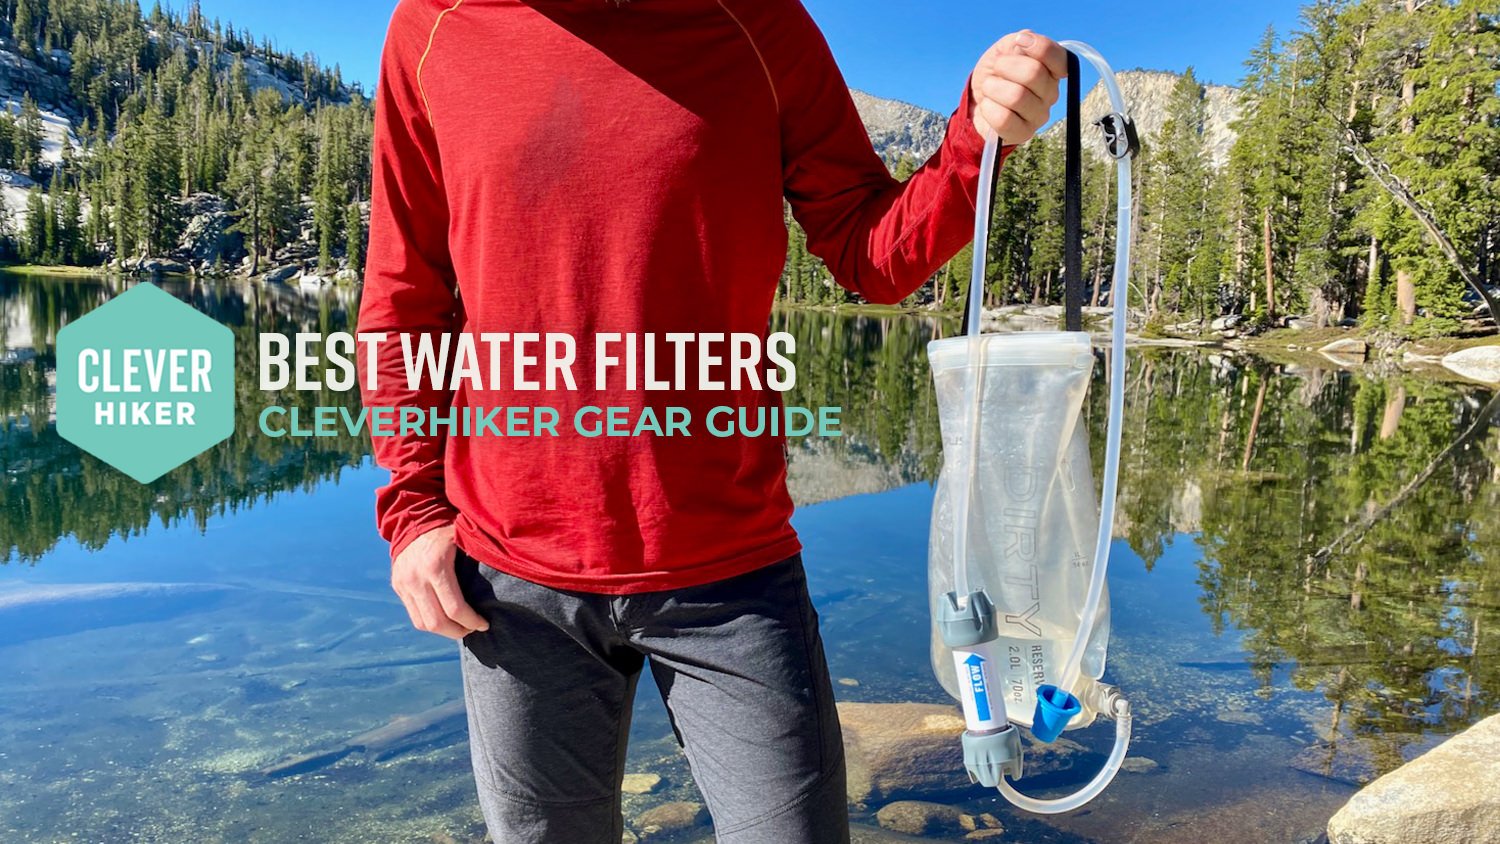 How to store camping water filters